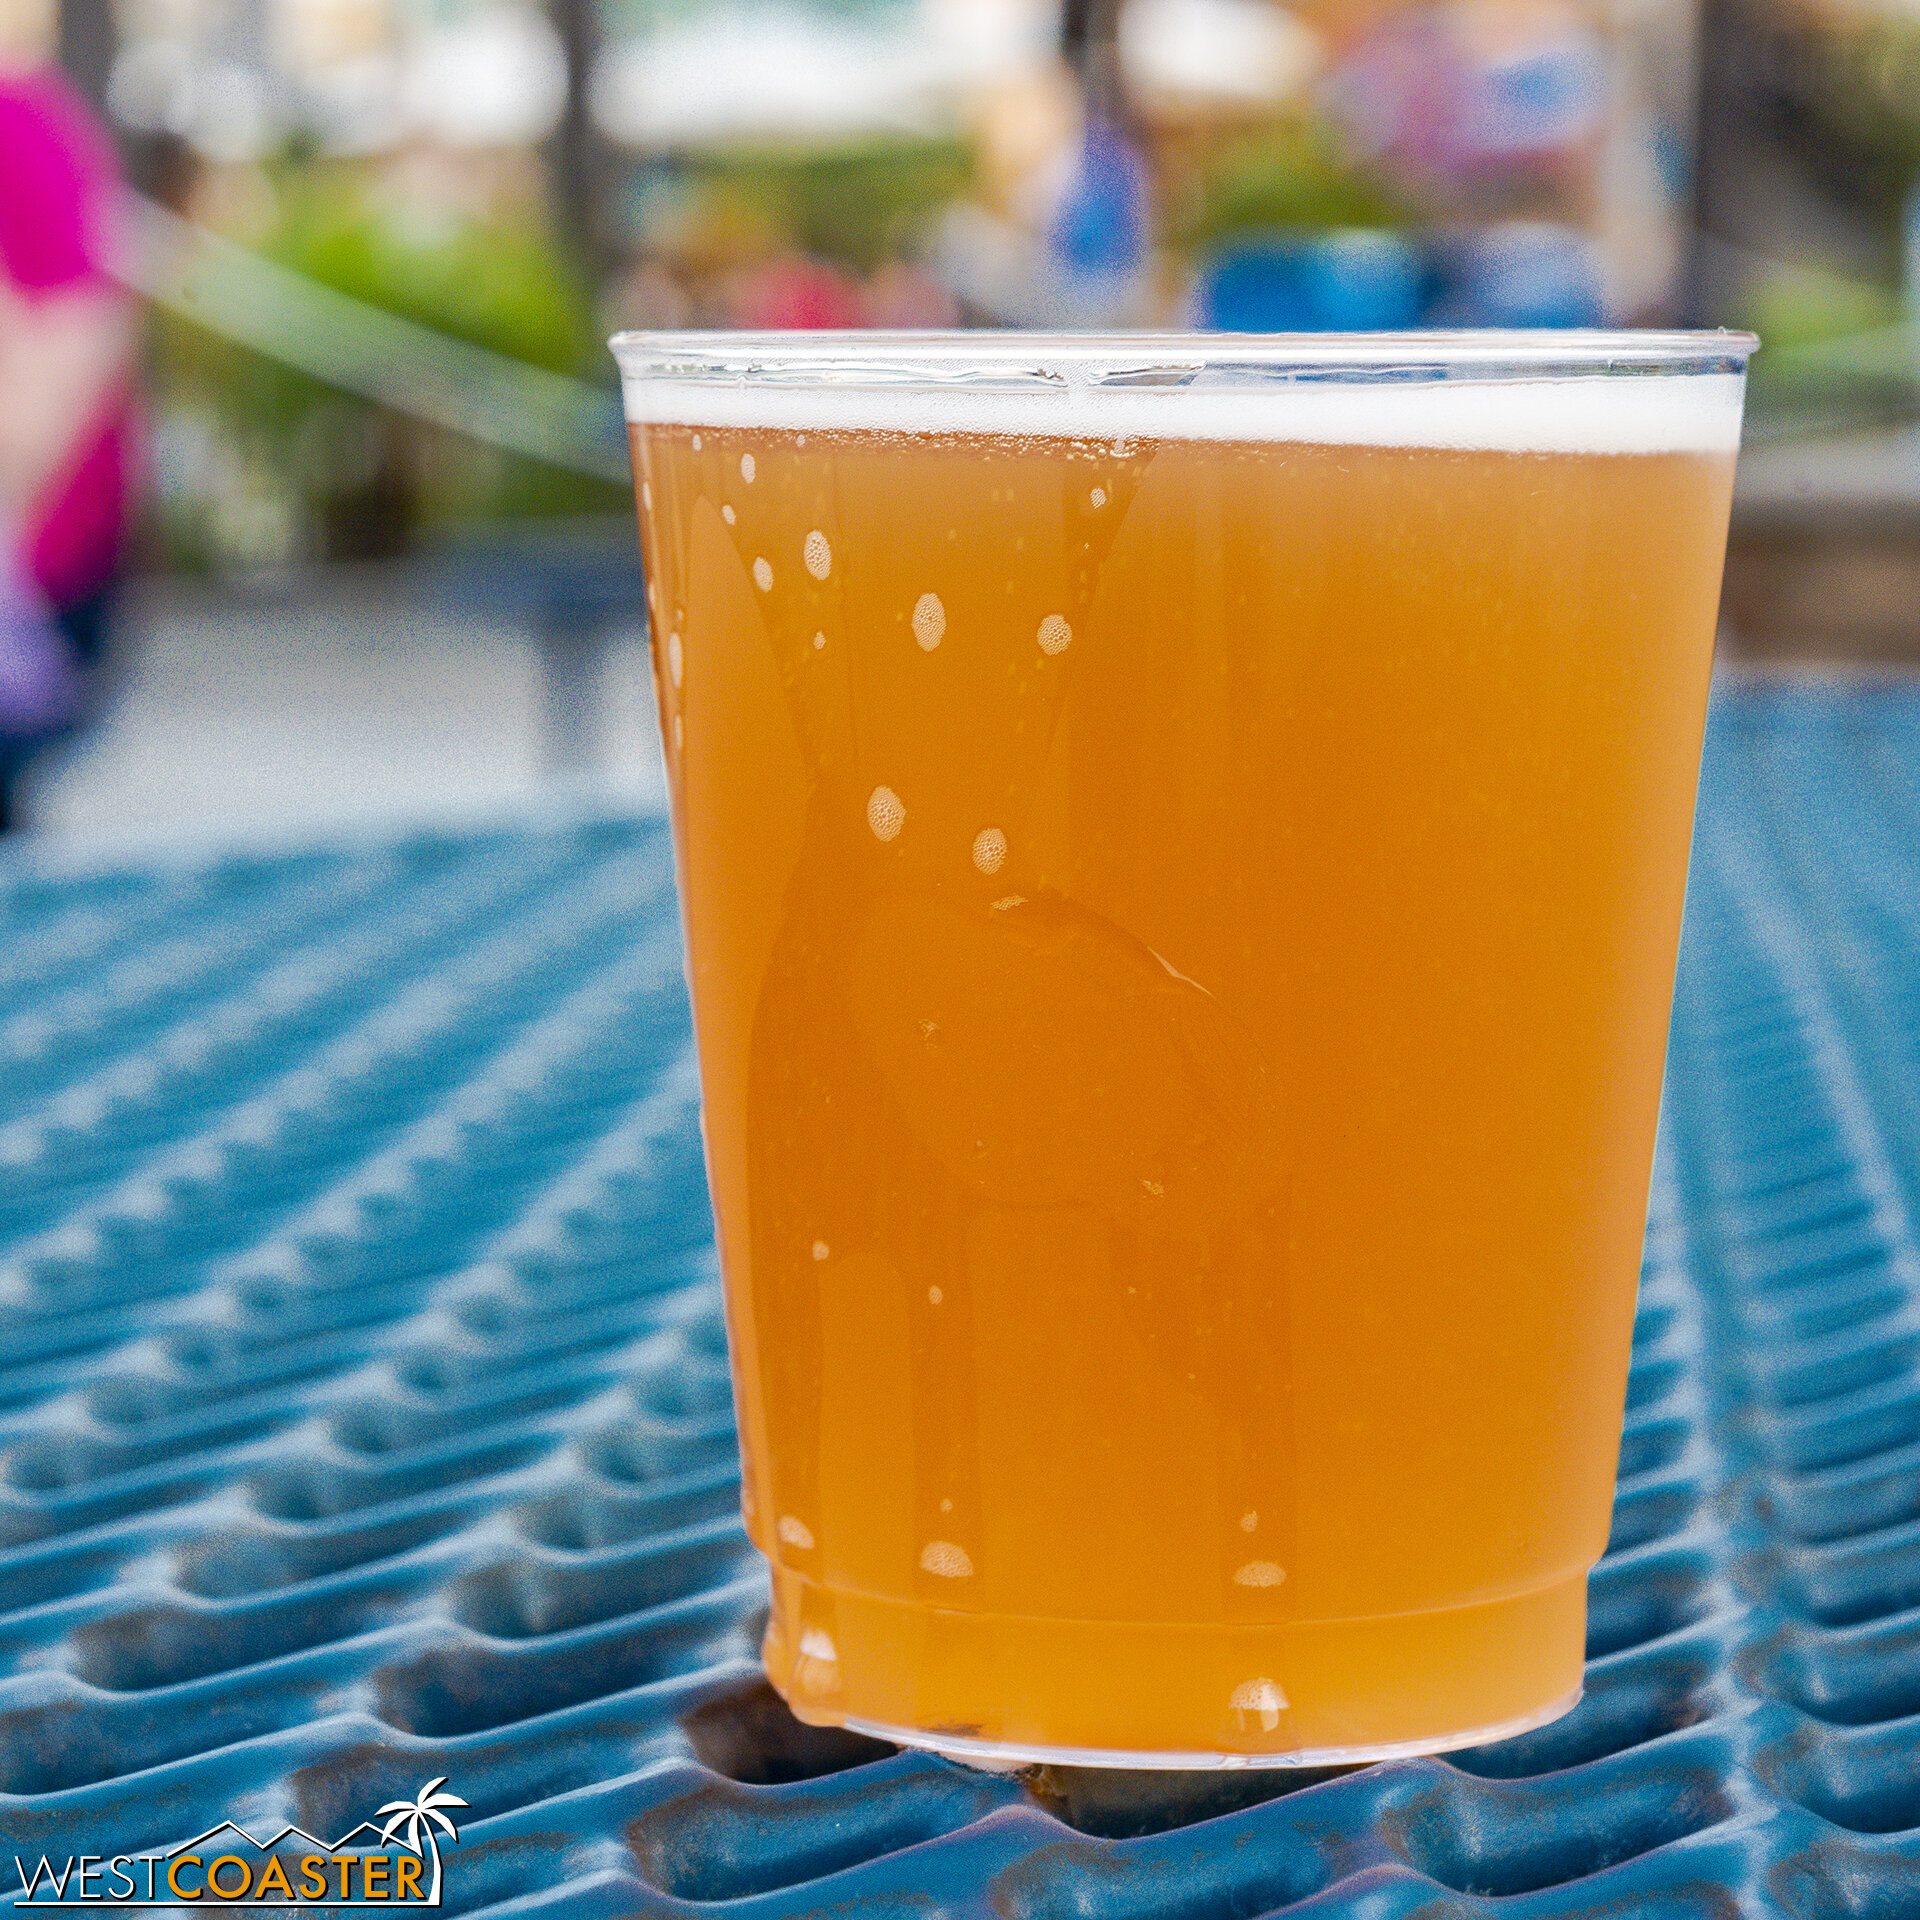  Boysenberry Beer, from Boardwalk BBQ Booth #2 (and many other locations). 